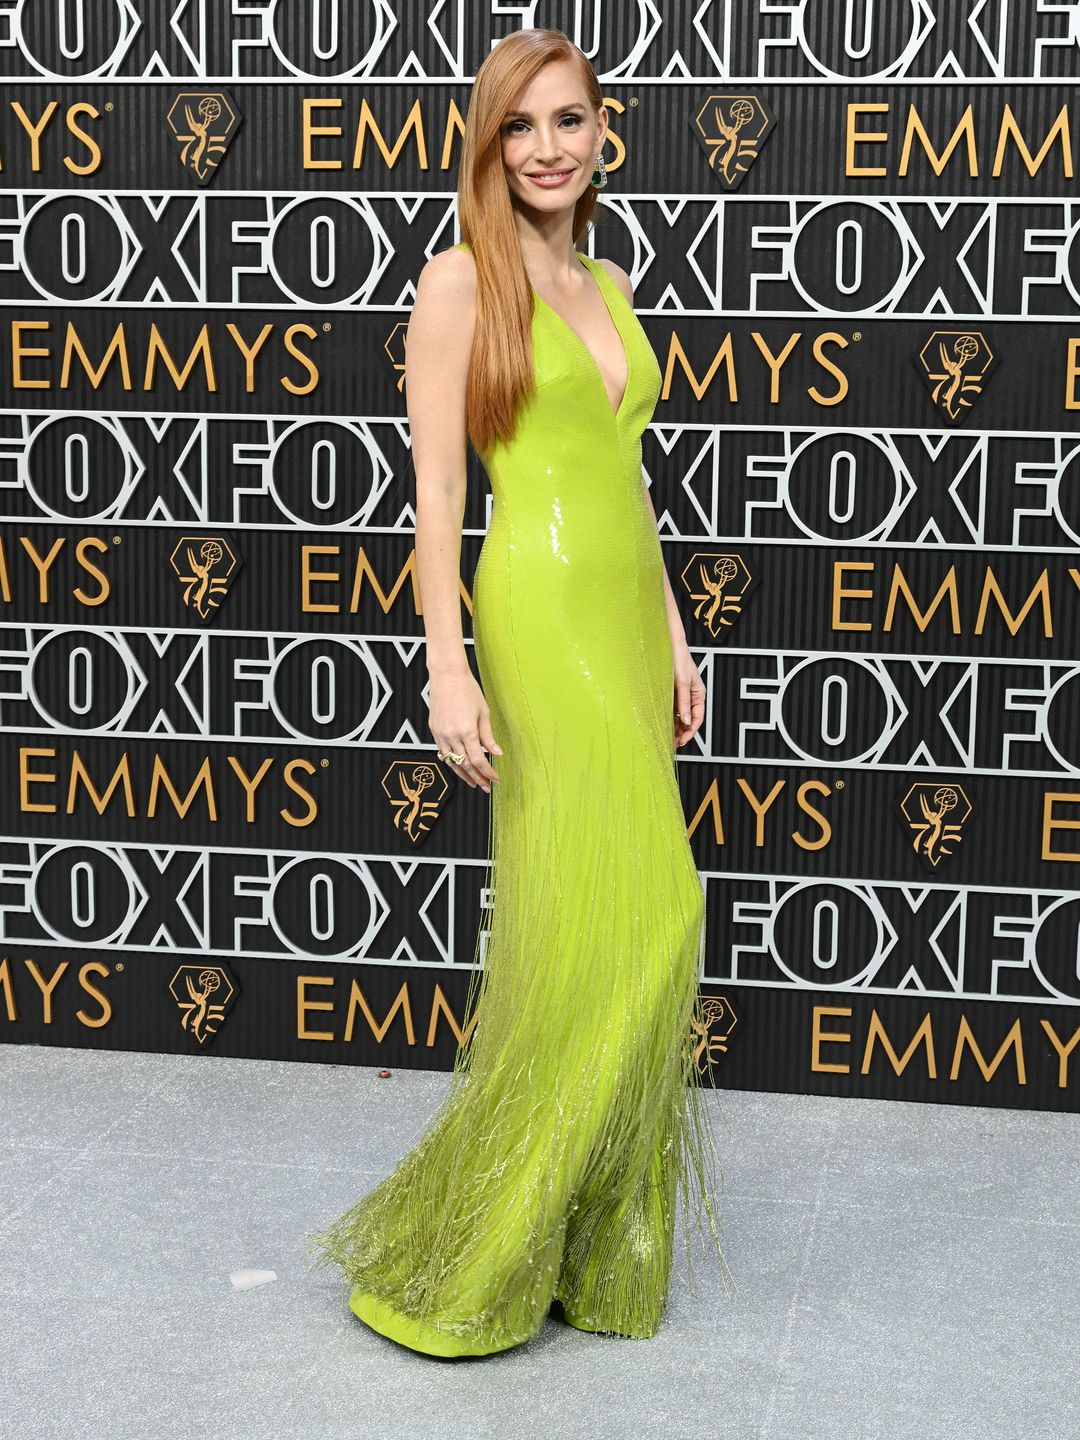 The best dressed stars at the Emmys 2024 isslocus Network News Locus